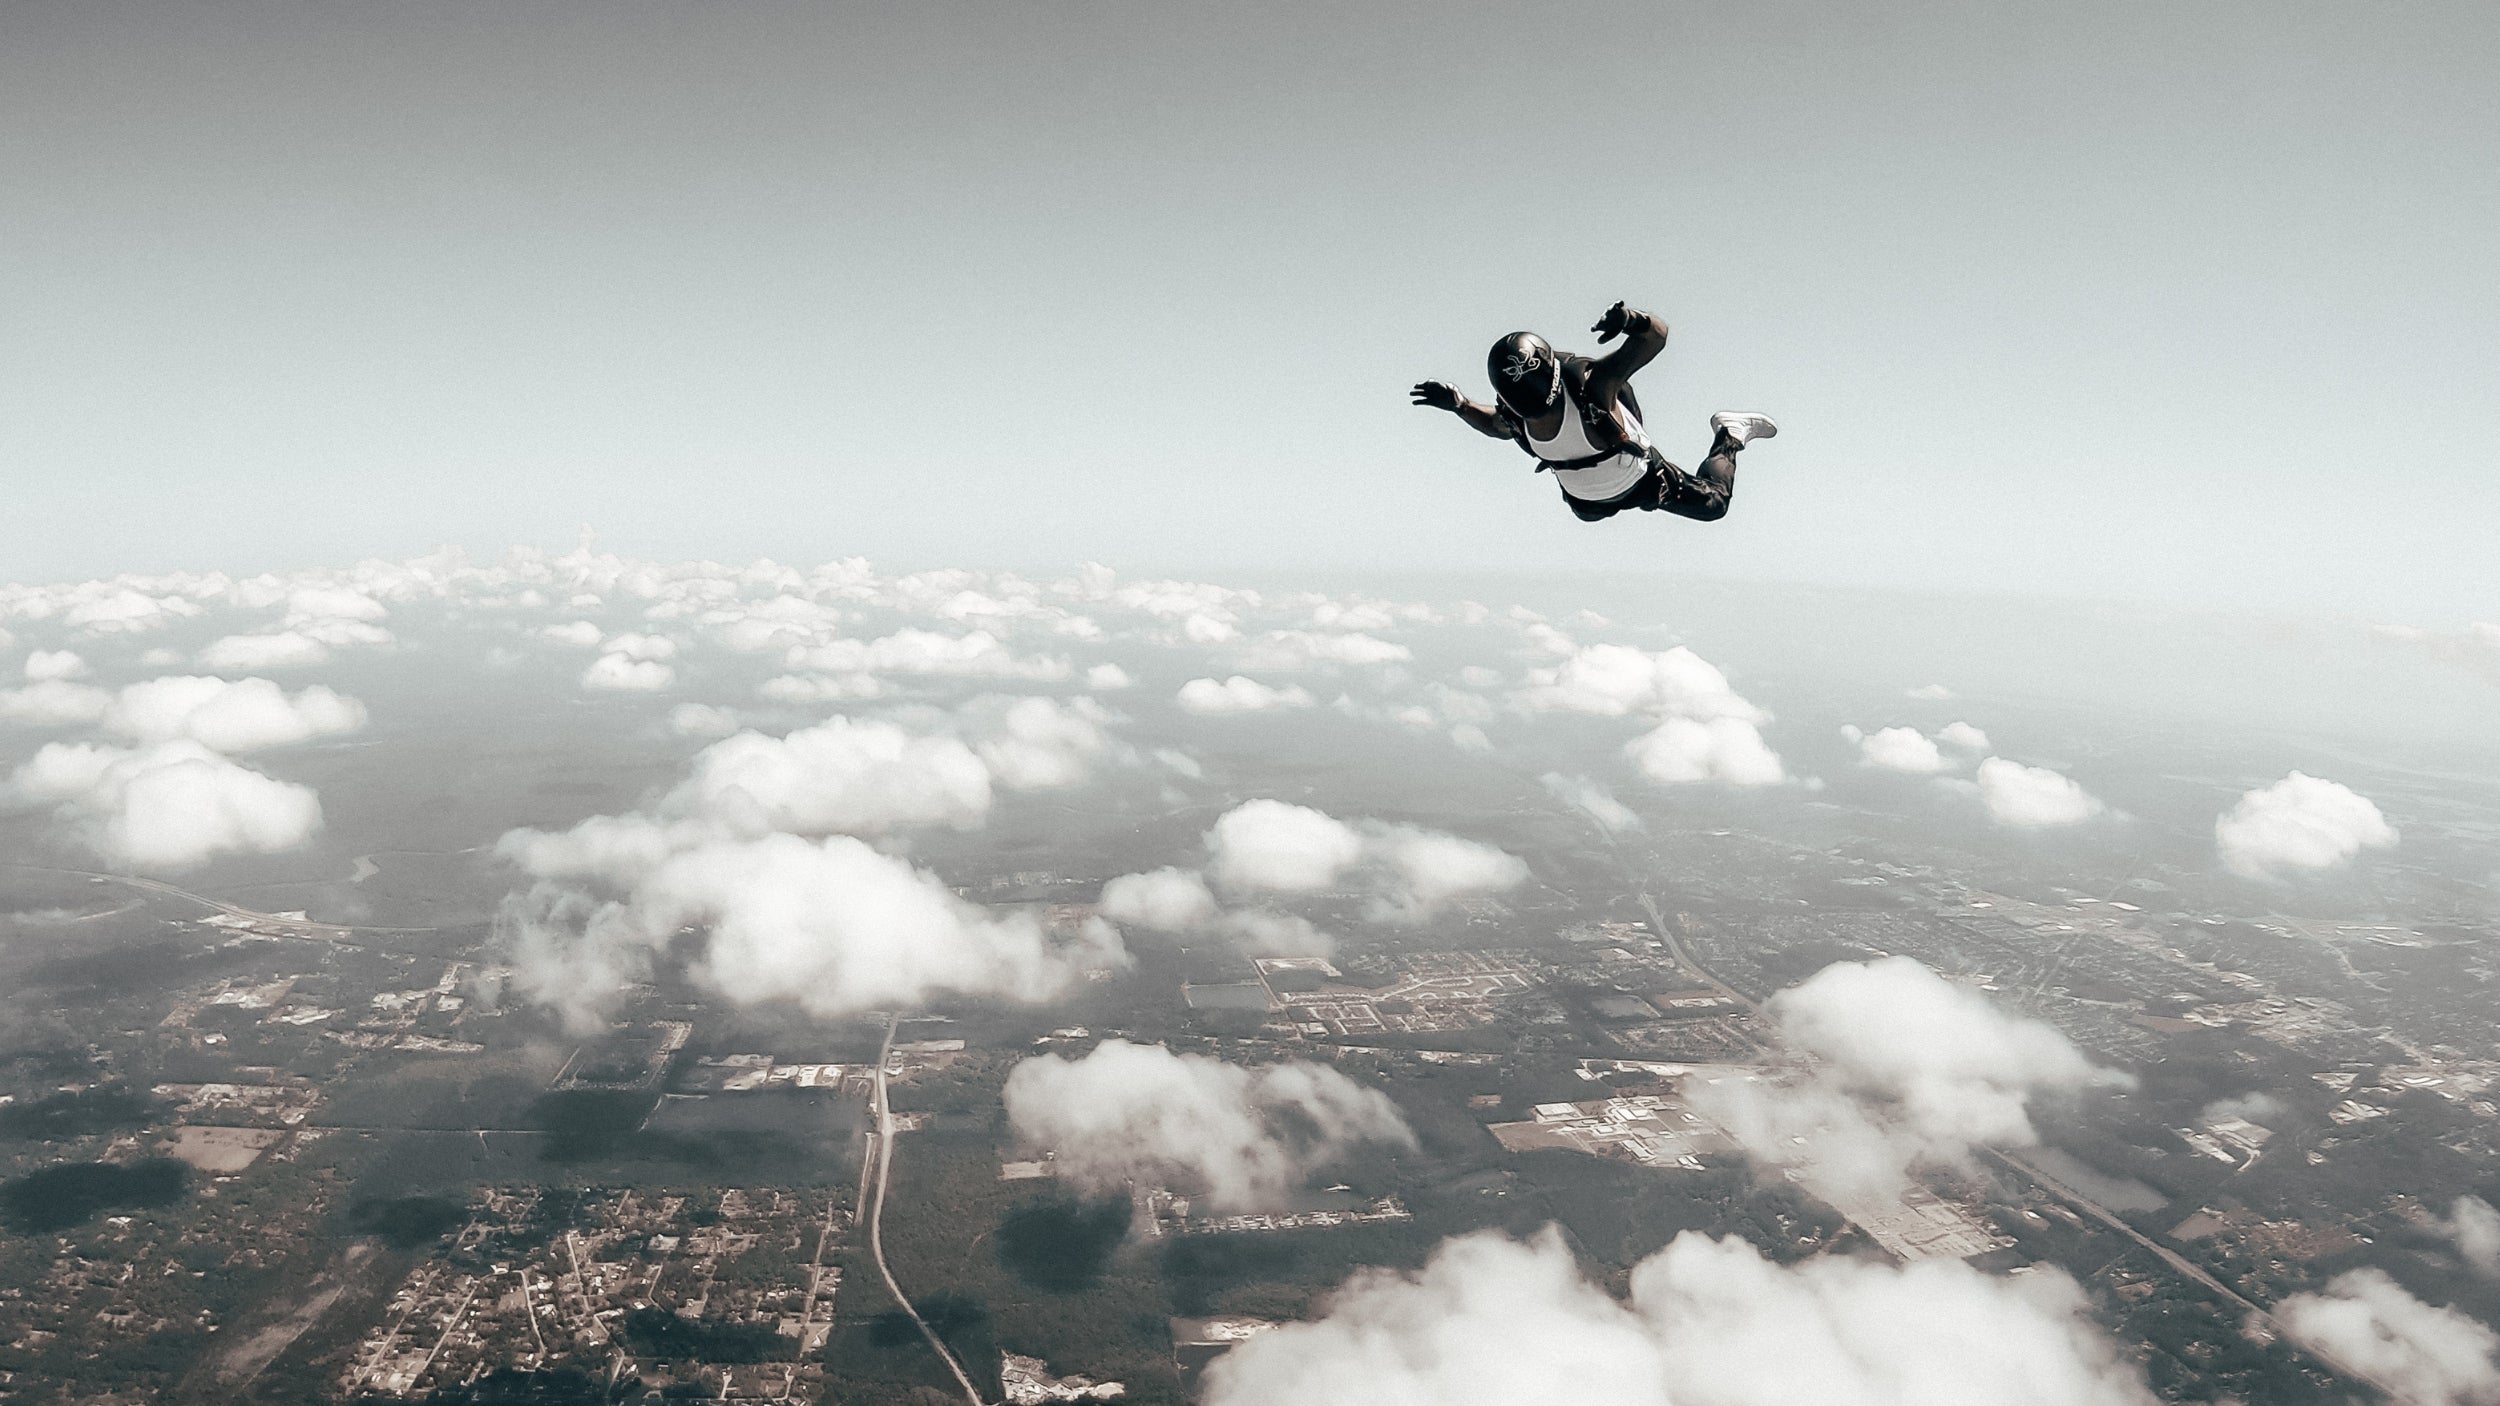 A skydiver freefalls against a backdrop of a vast landscape with scattered clouds, the ground visible far below.